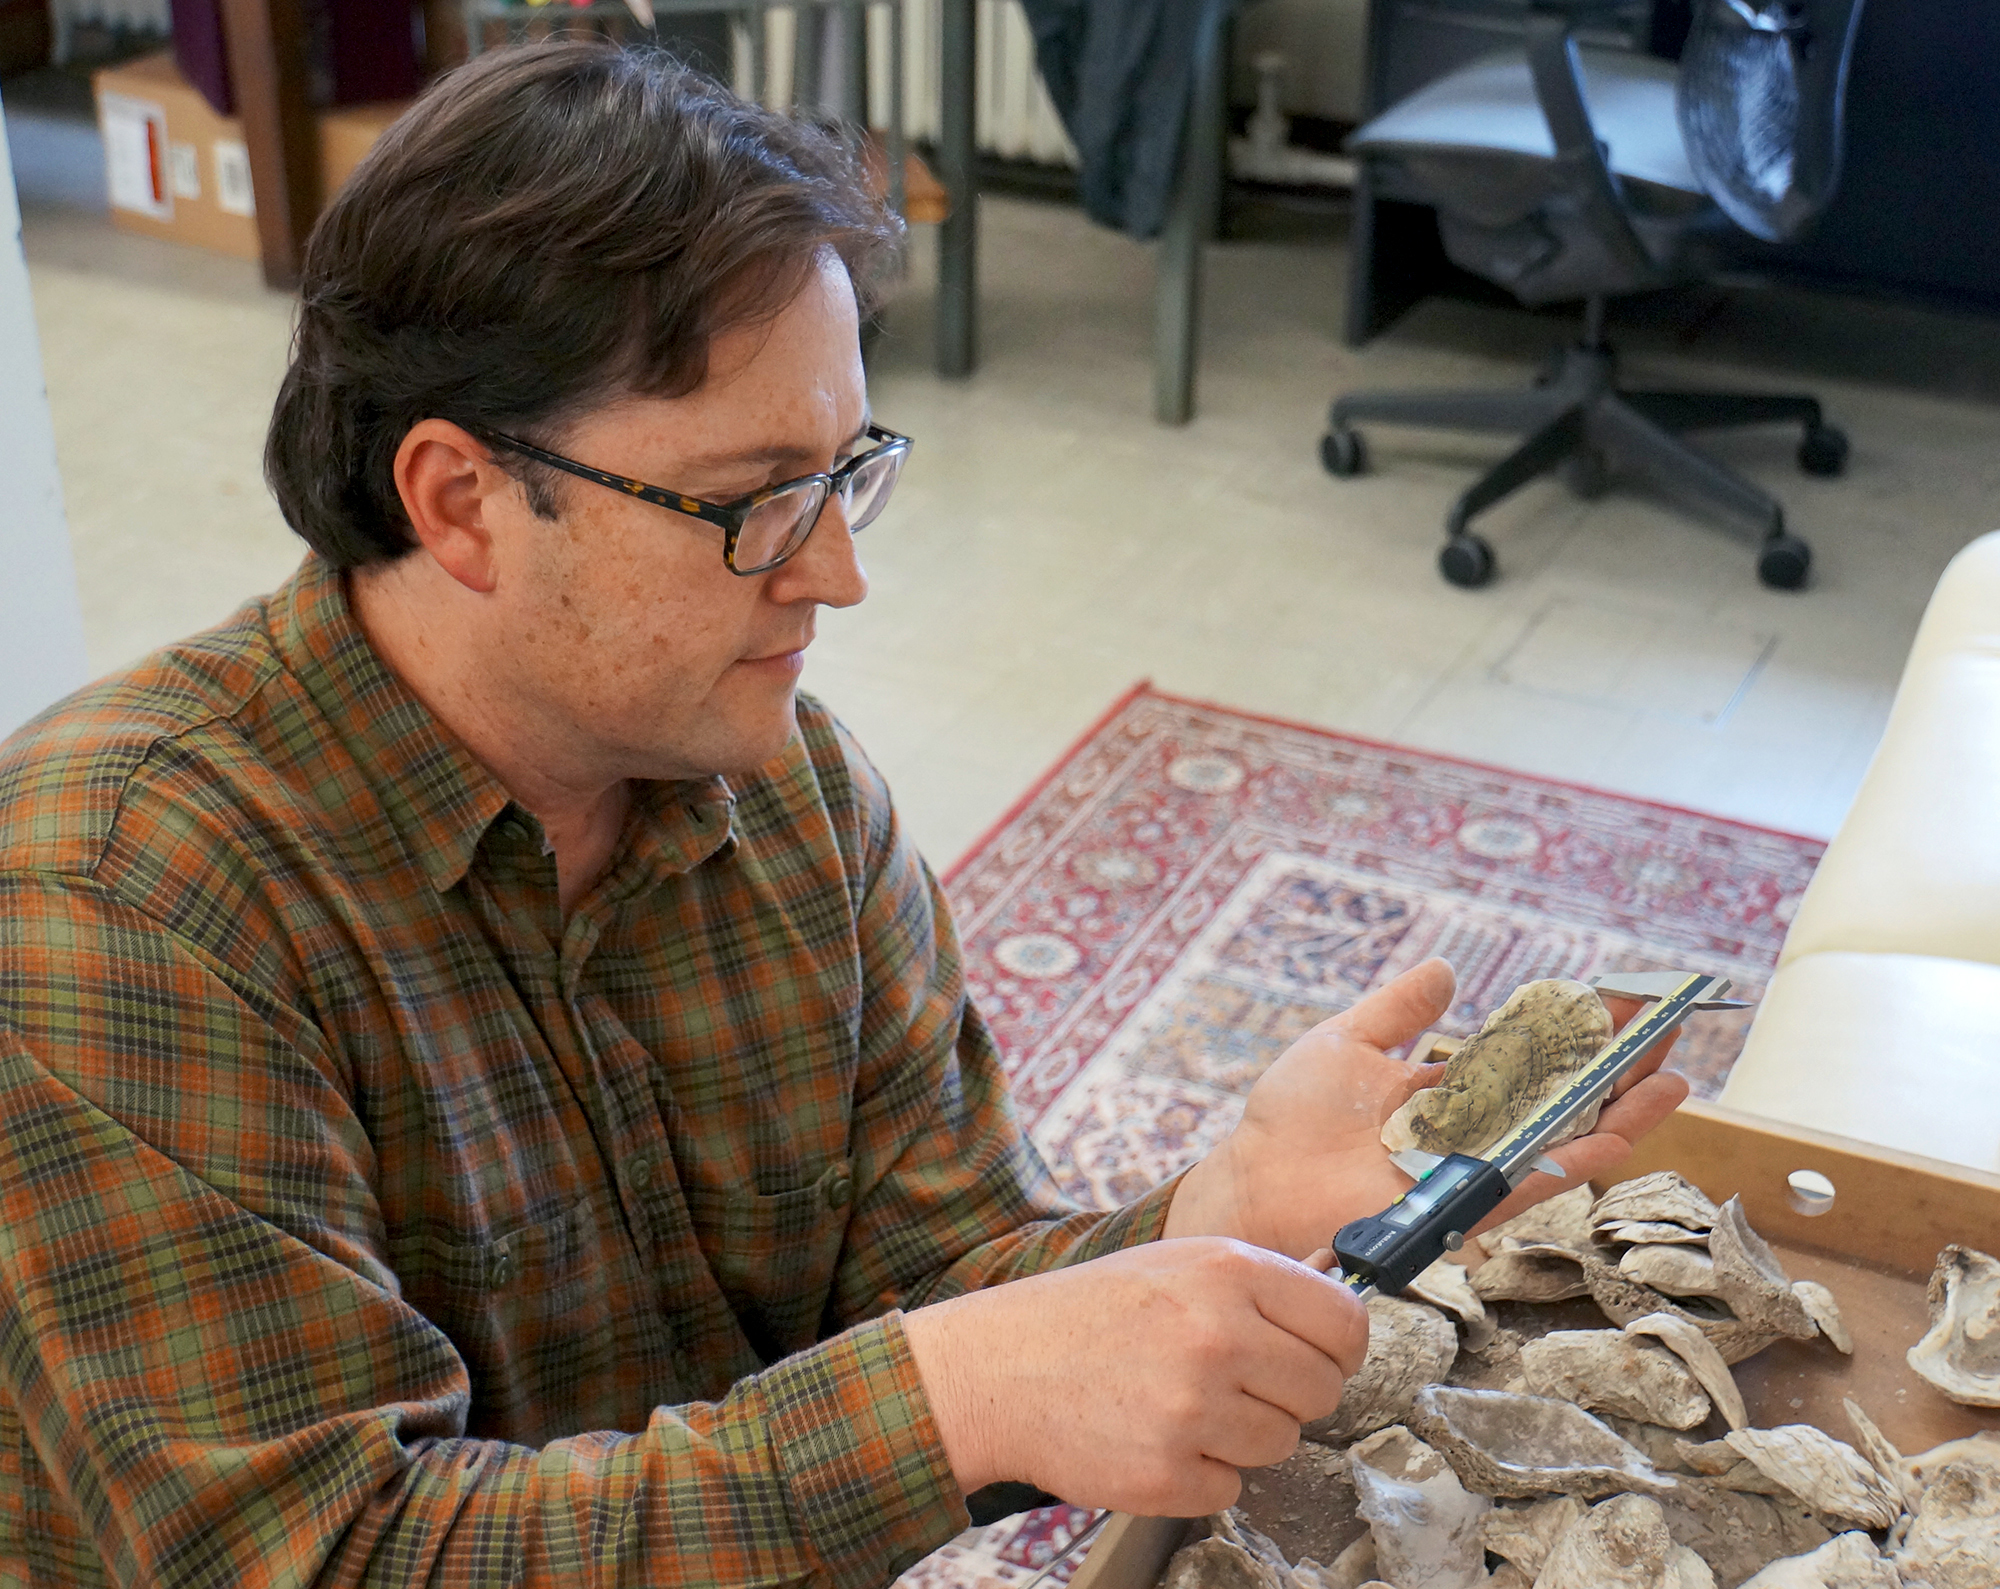 Torben Rick, an anthropologist at the Smithsonian's National Museum of Natural History and lead author of the research, examines a 1,500-year-old oyster shell in the museum's collection.